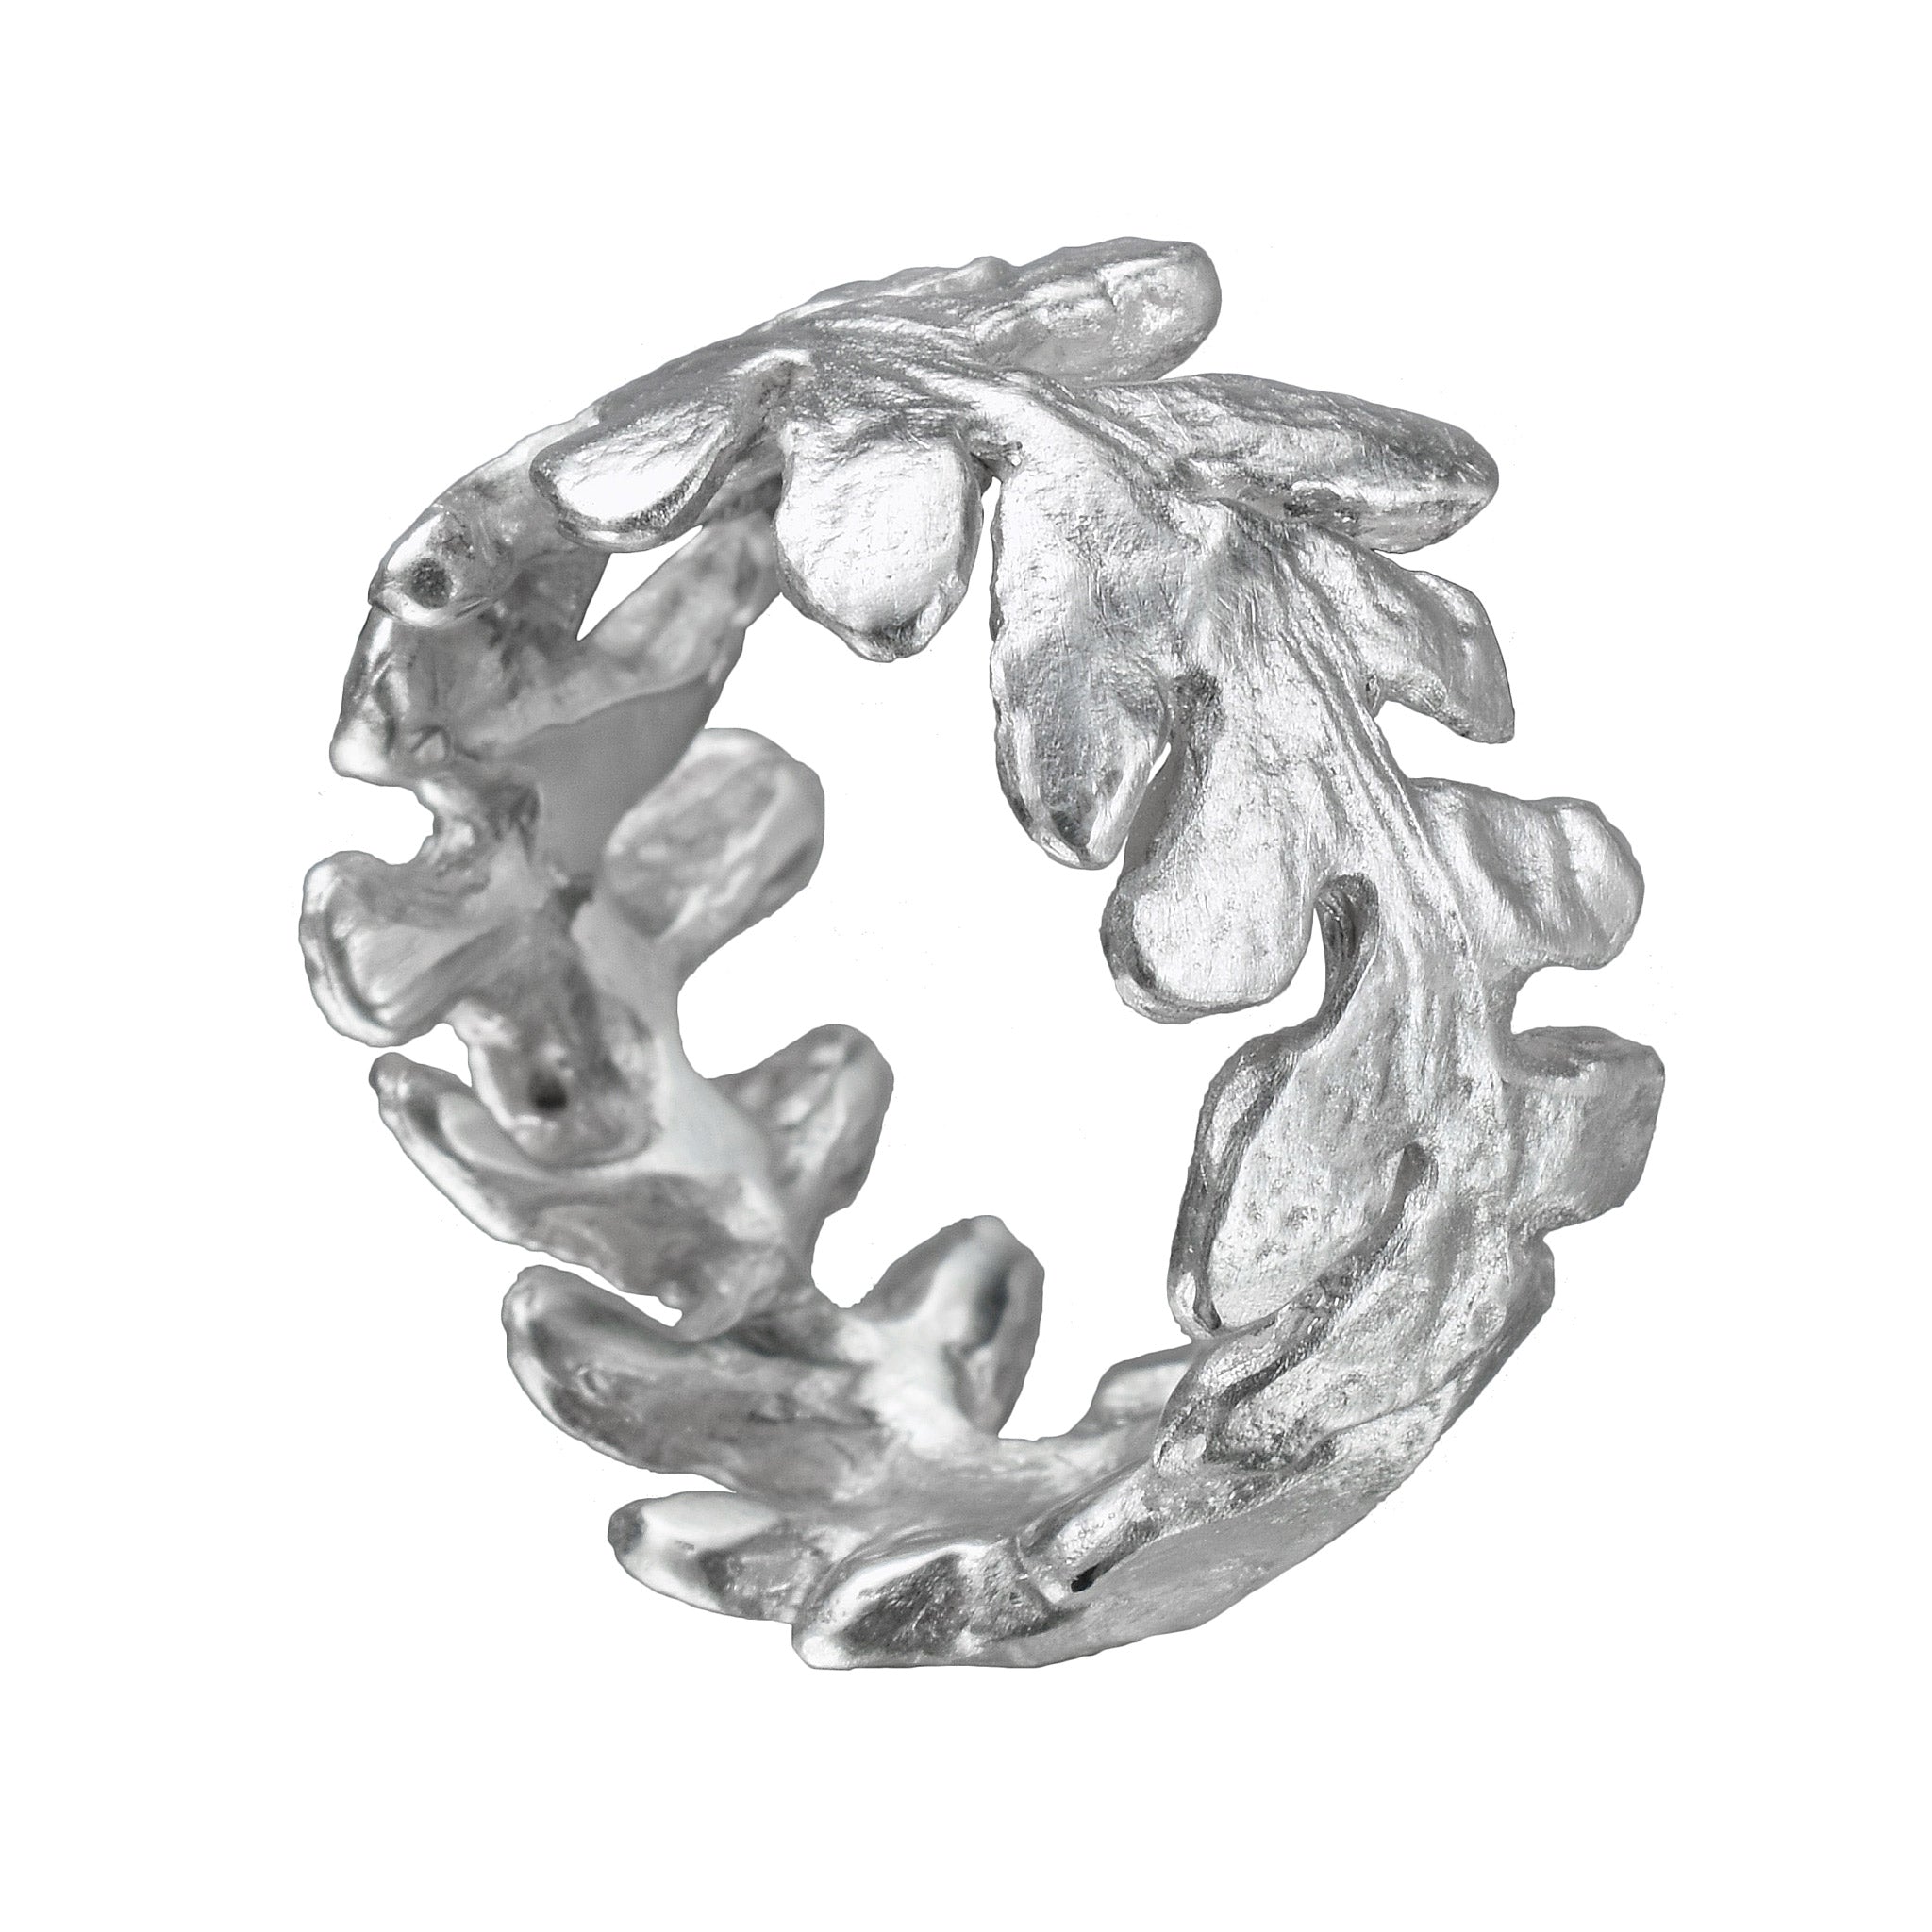 Fern Ring - Sterling Silver - US Size 6